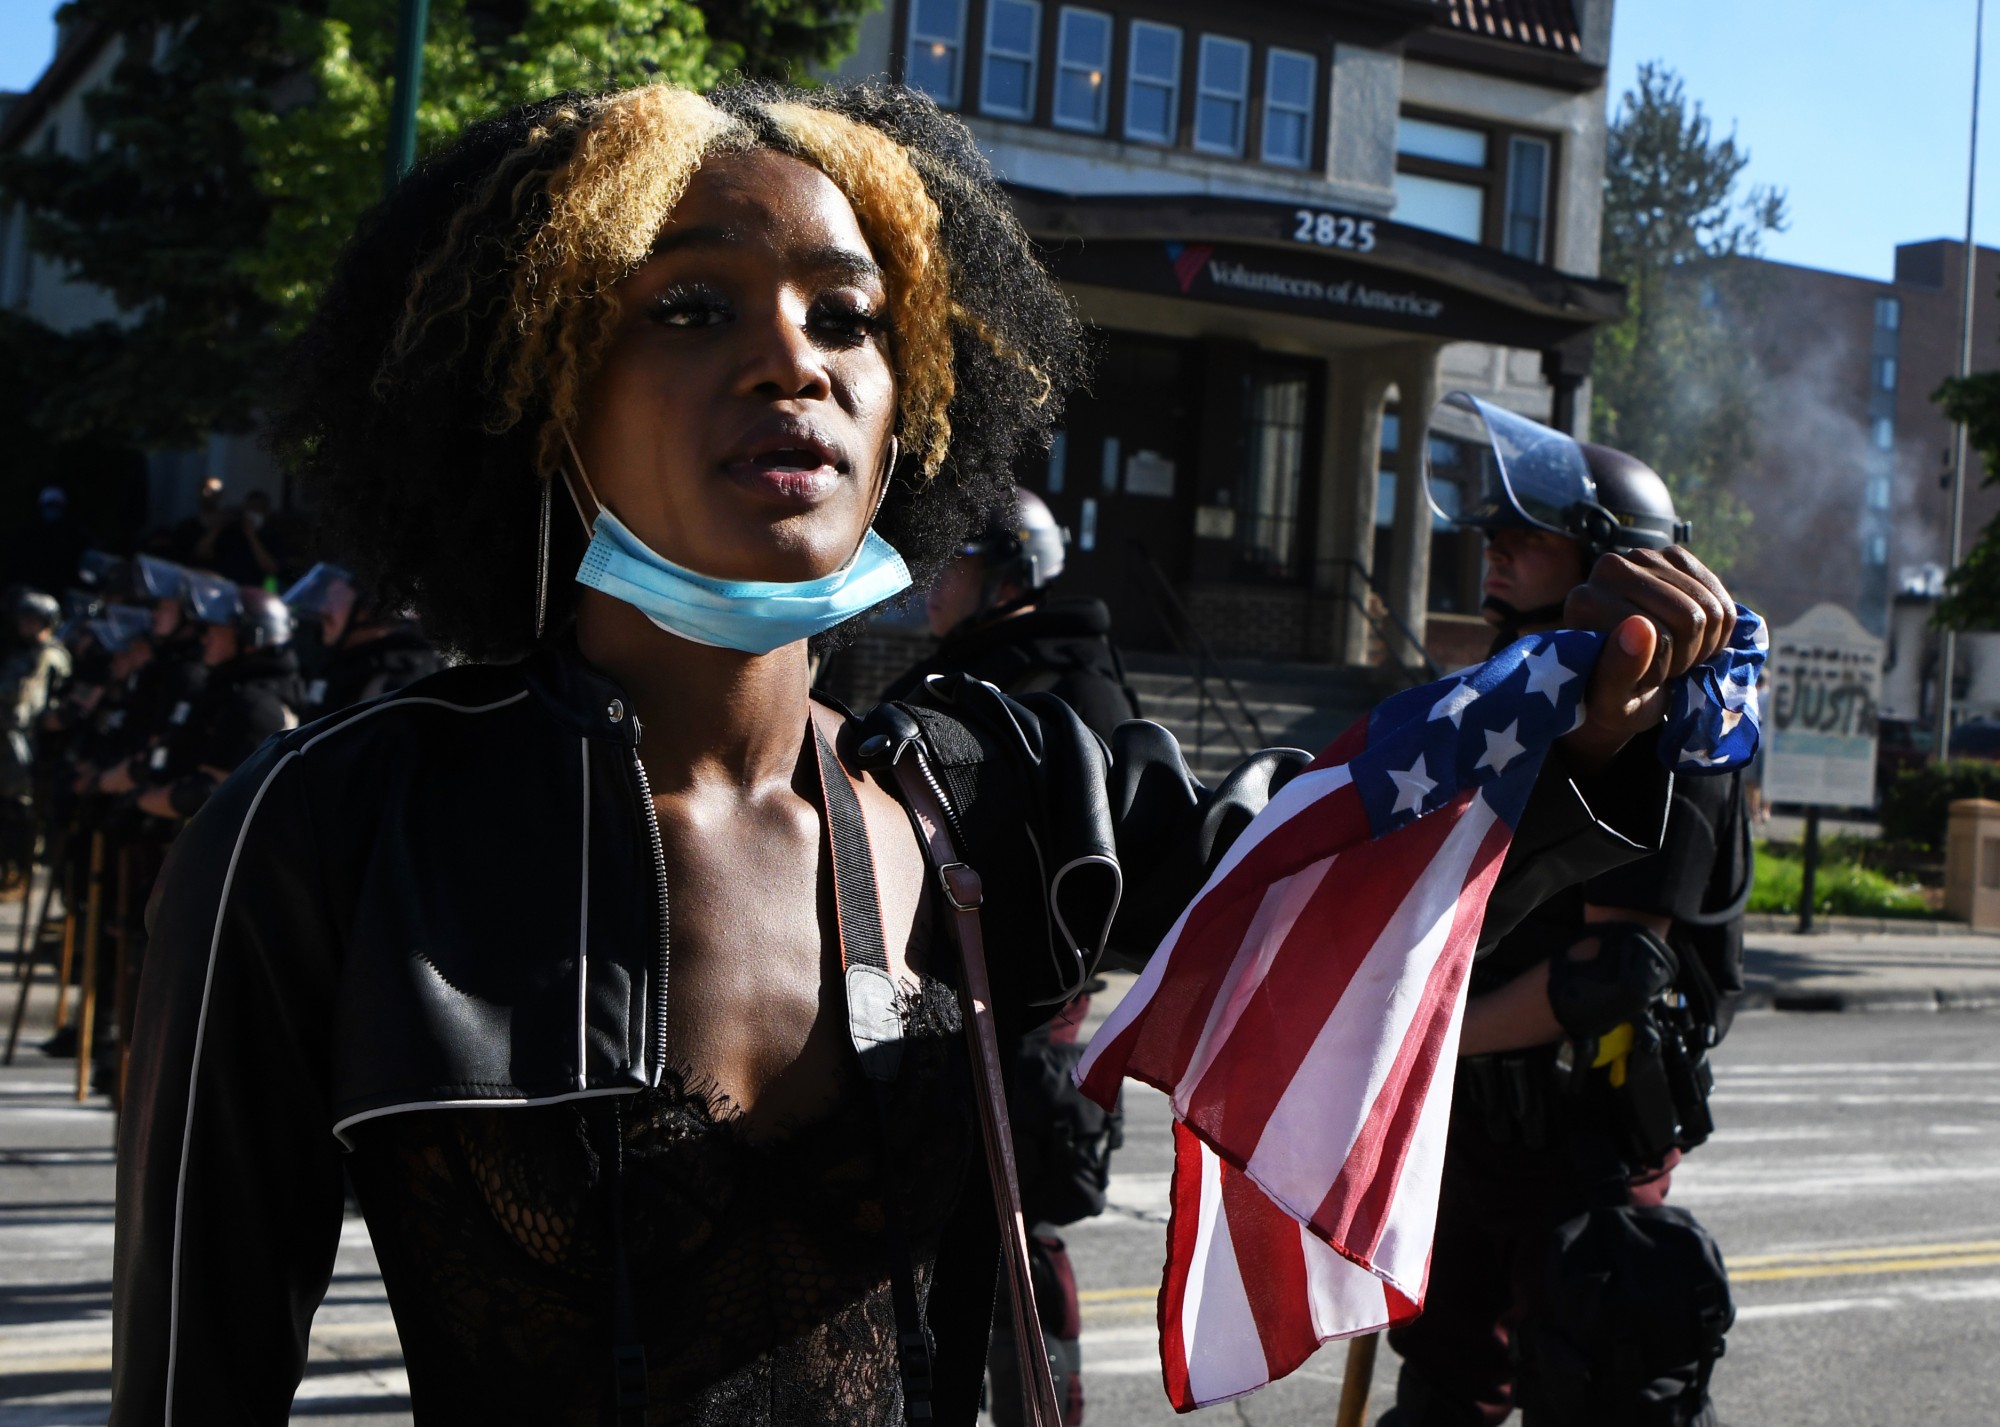 Akilha Venzant holds an American flag while addressing law enforcement on East Lake Street near the Minneapolis 3rd Police Precinct on Friday, May 29. While the crowd of demonstrators chanted “Black Lives Matter,” Venzant addressed each officer individually, saying: “Black lives matter. They do. They really do.”